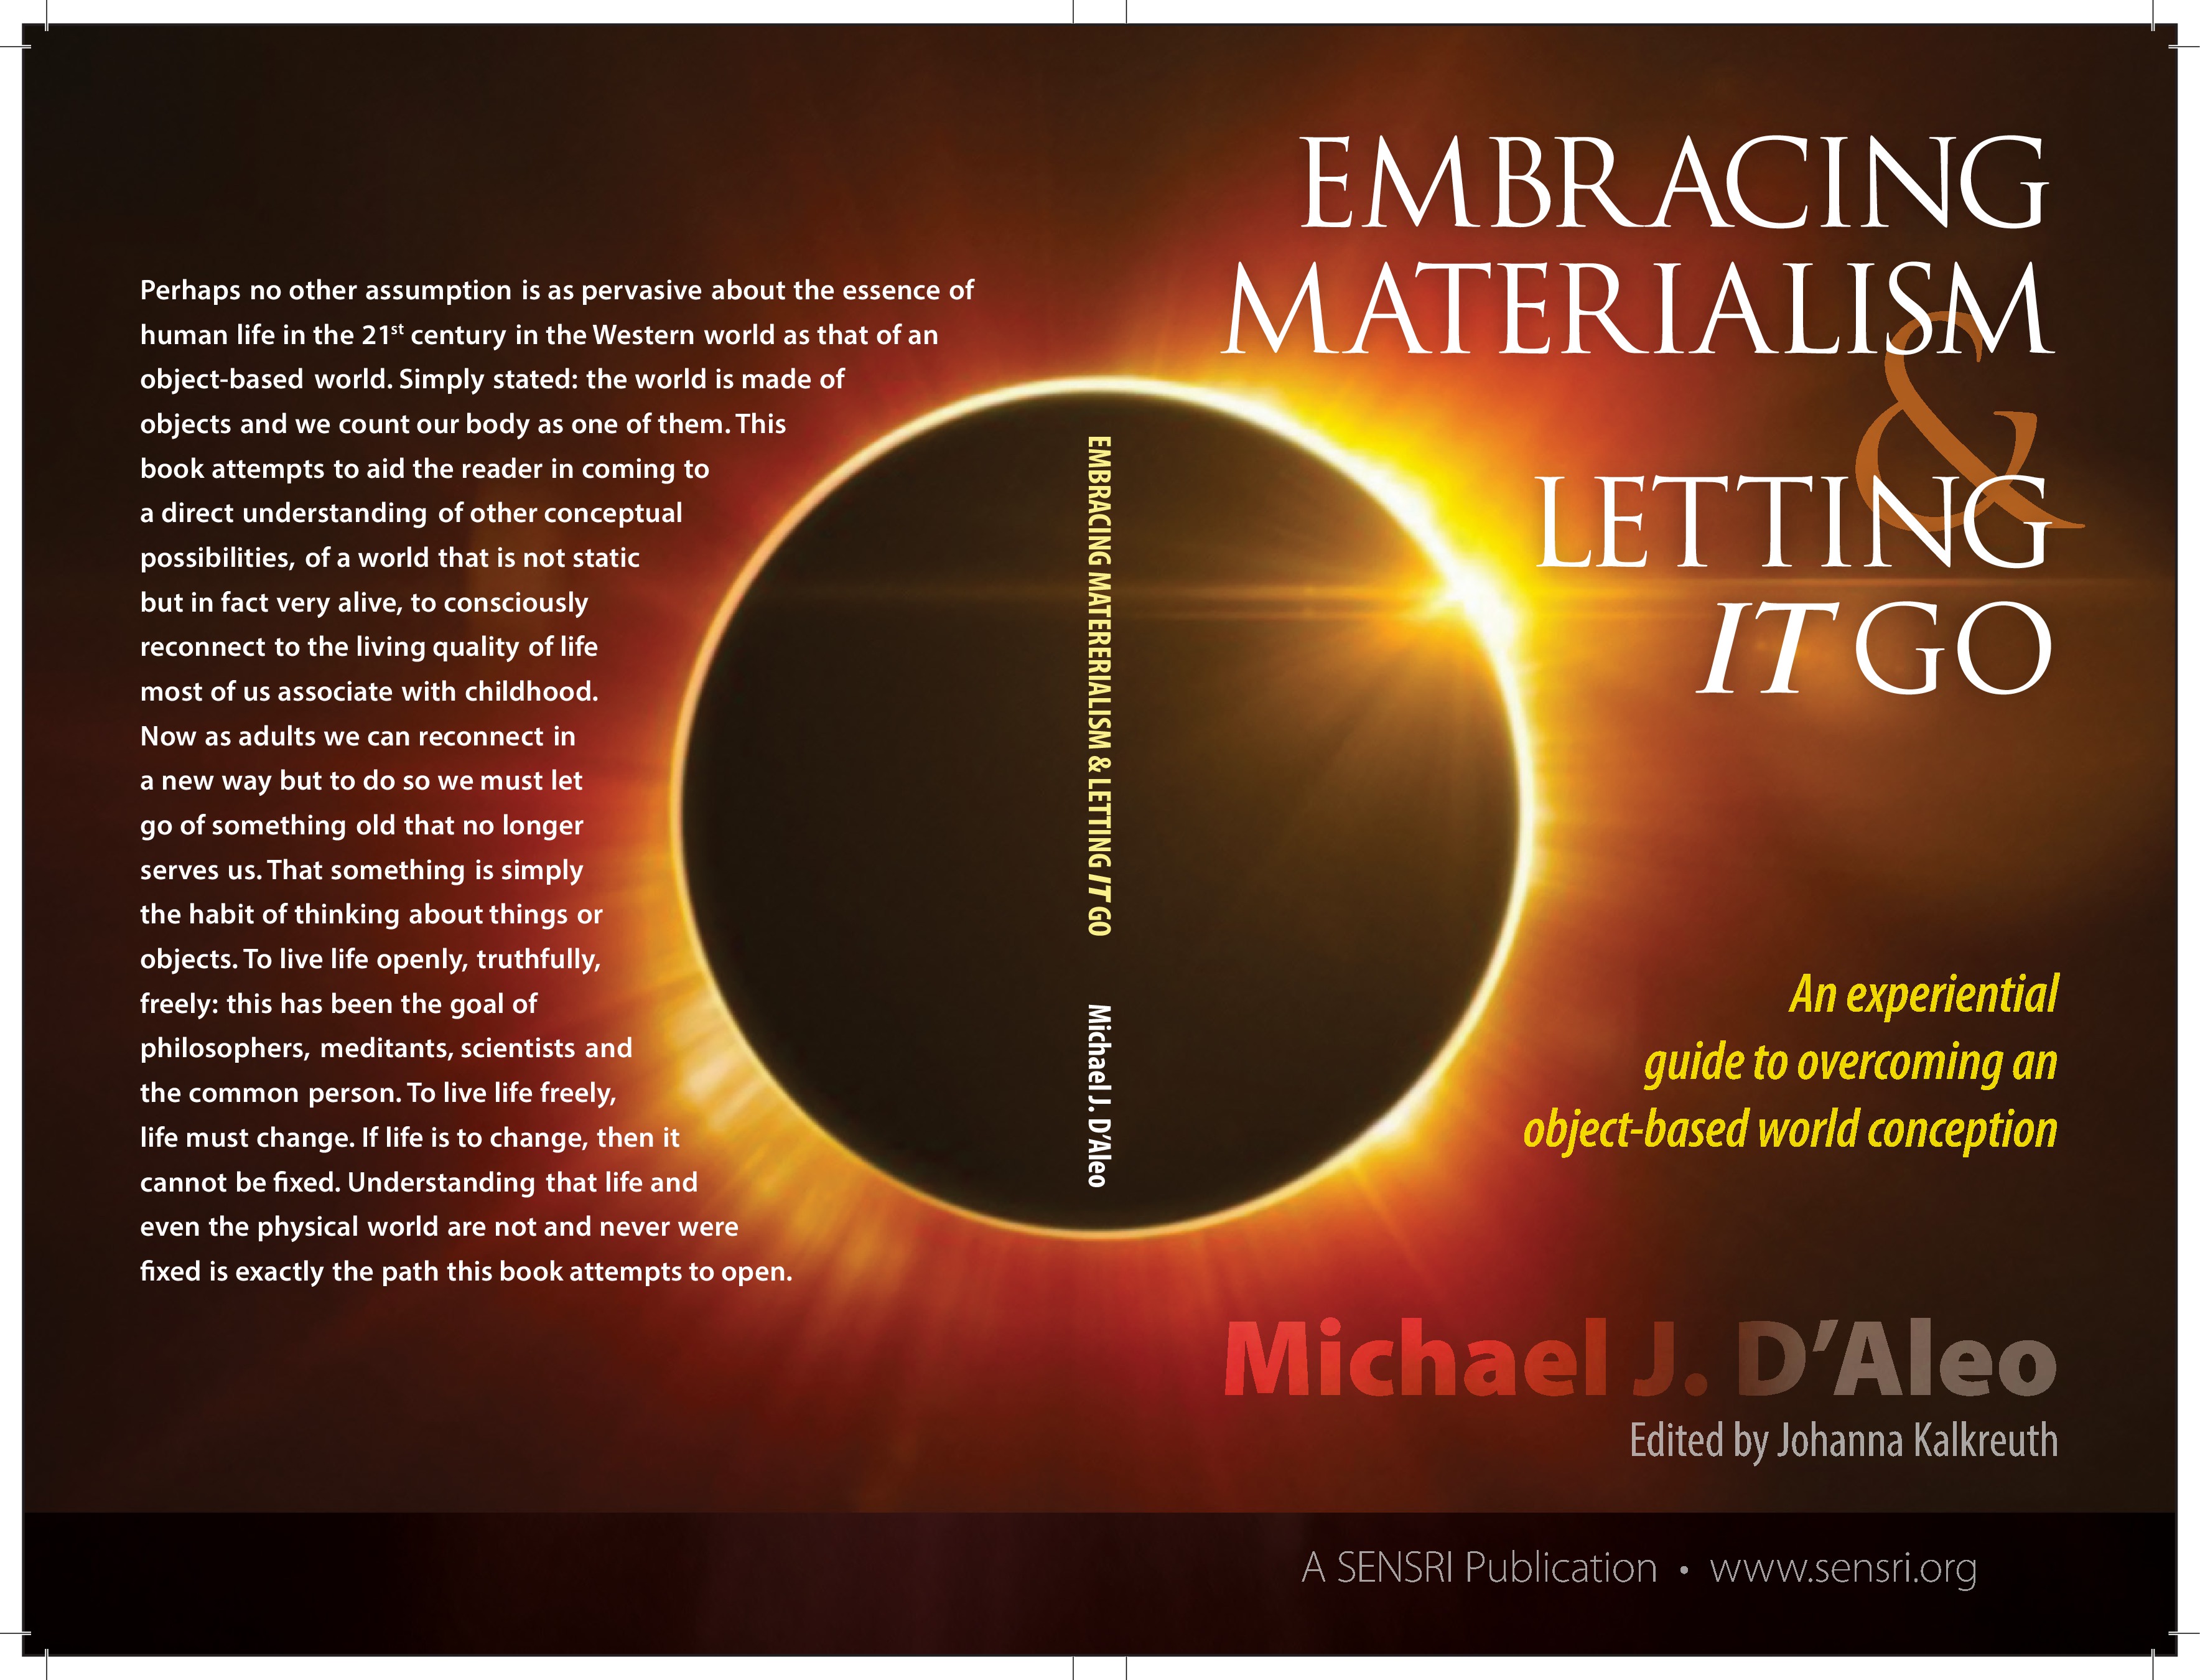 Embracing Materialism and Letting <i>It</i> Go: An experiential guide to overcoming an object-based world conception by Michael J. D'Aleo